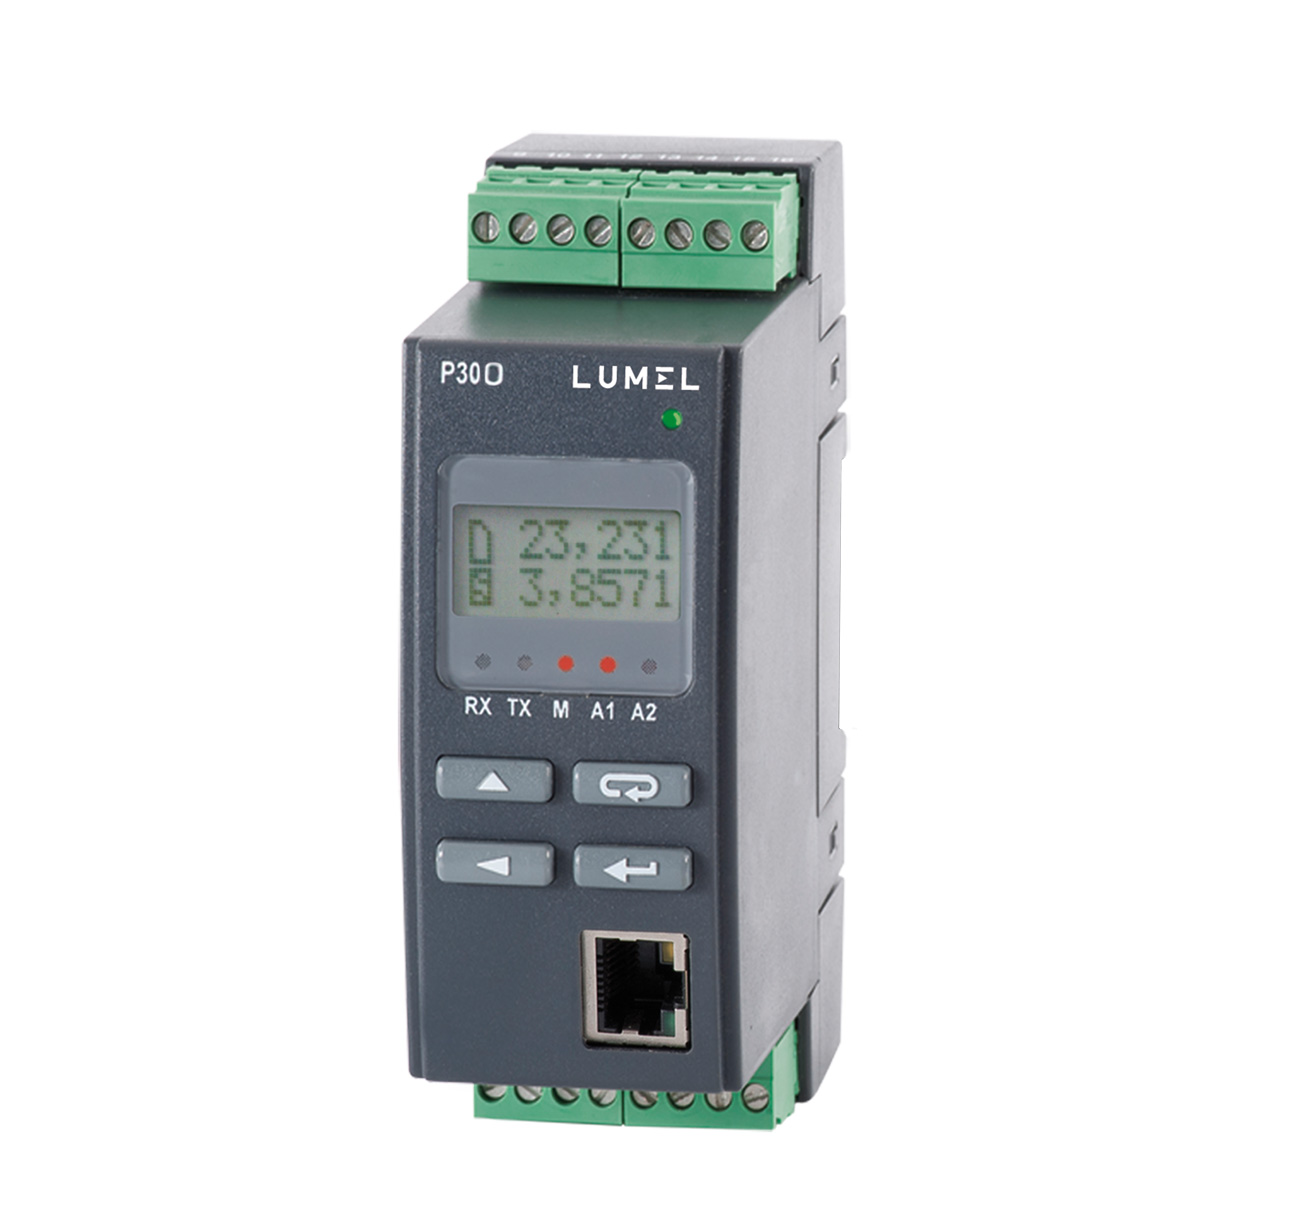 Transducer of pulses, frequency, turns, operation time with Ethernet